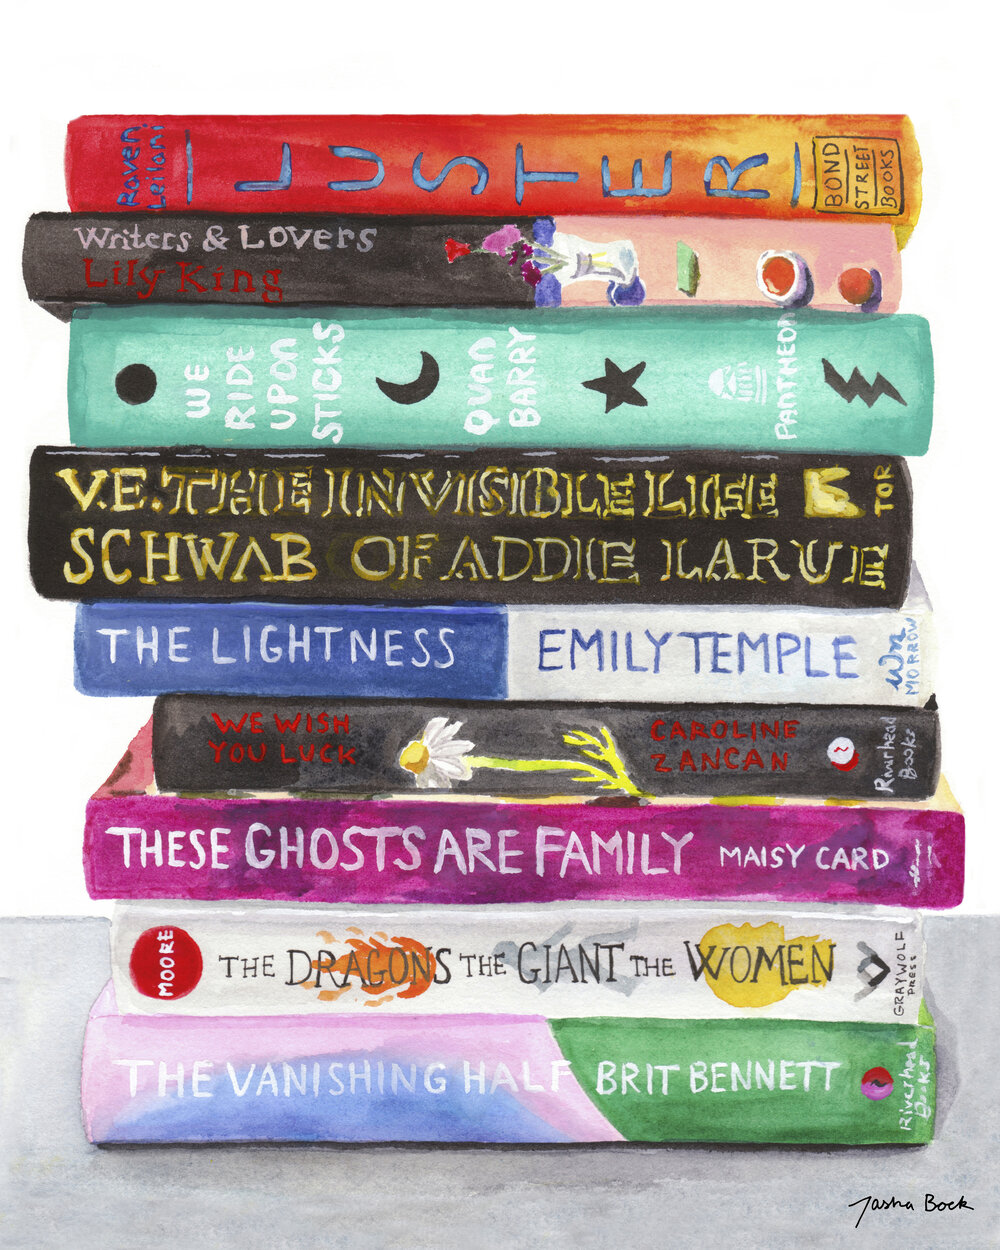 Book Stack Poster for Sale by Teenker